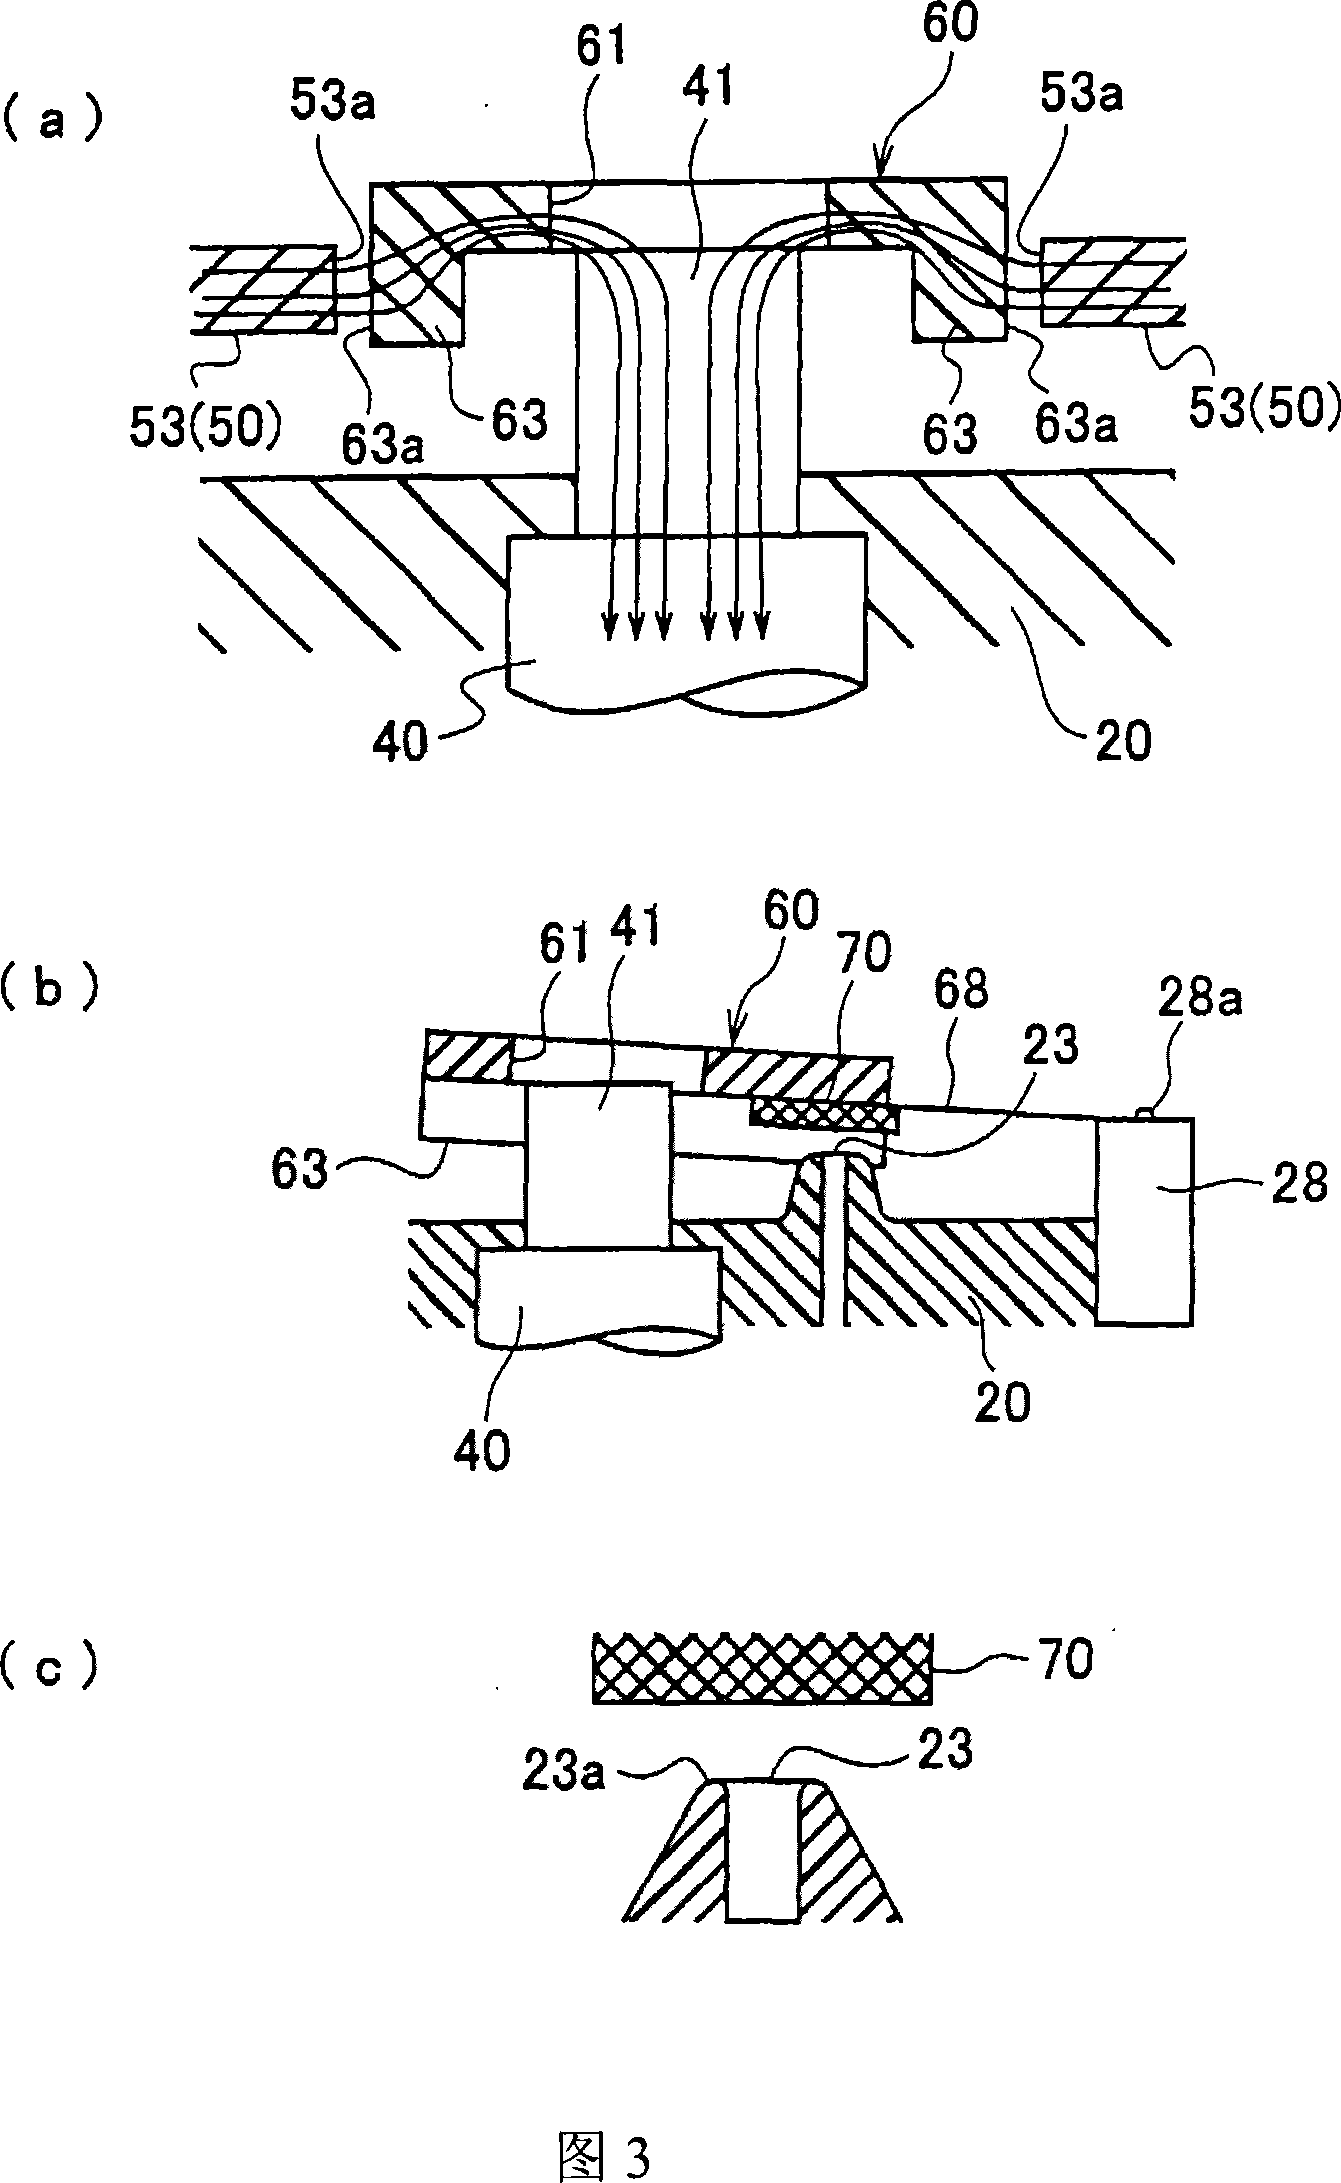 Electric-powered air release valve and blood pressure gauge